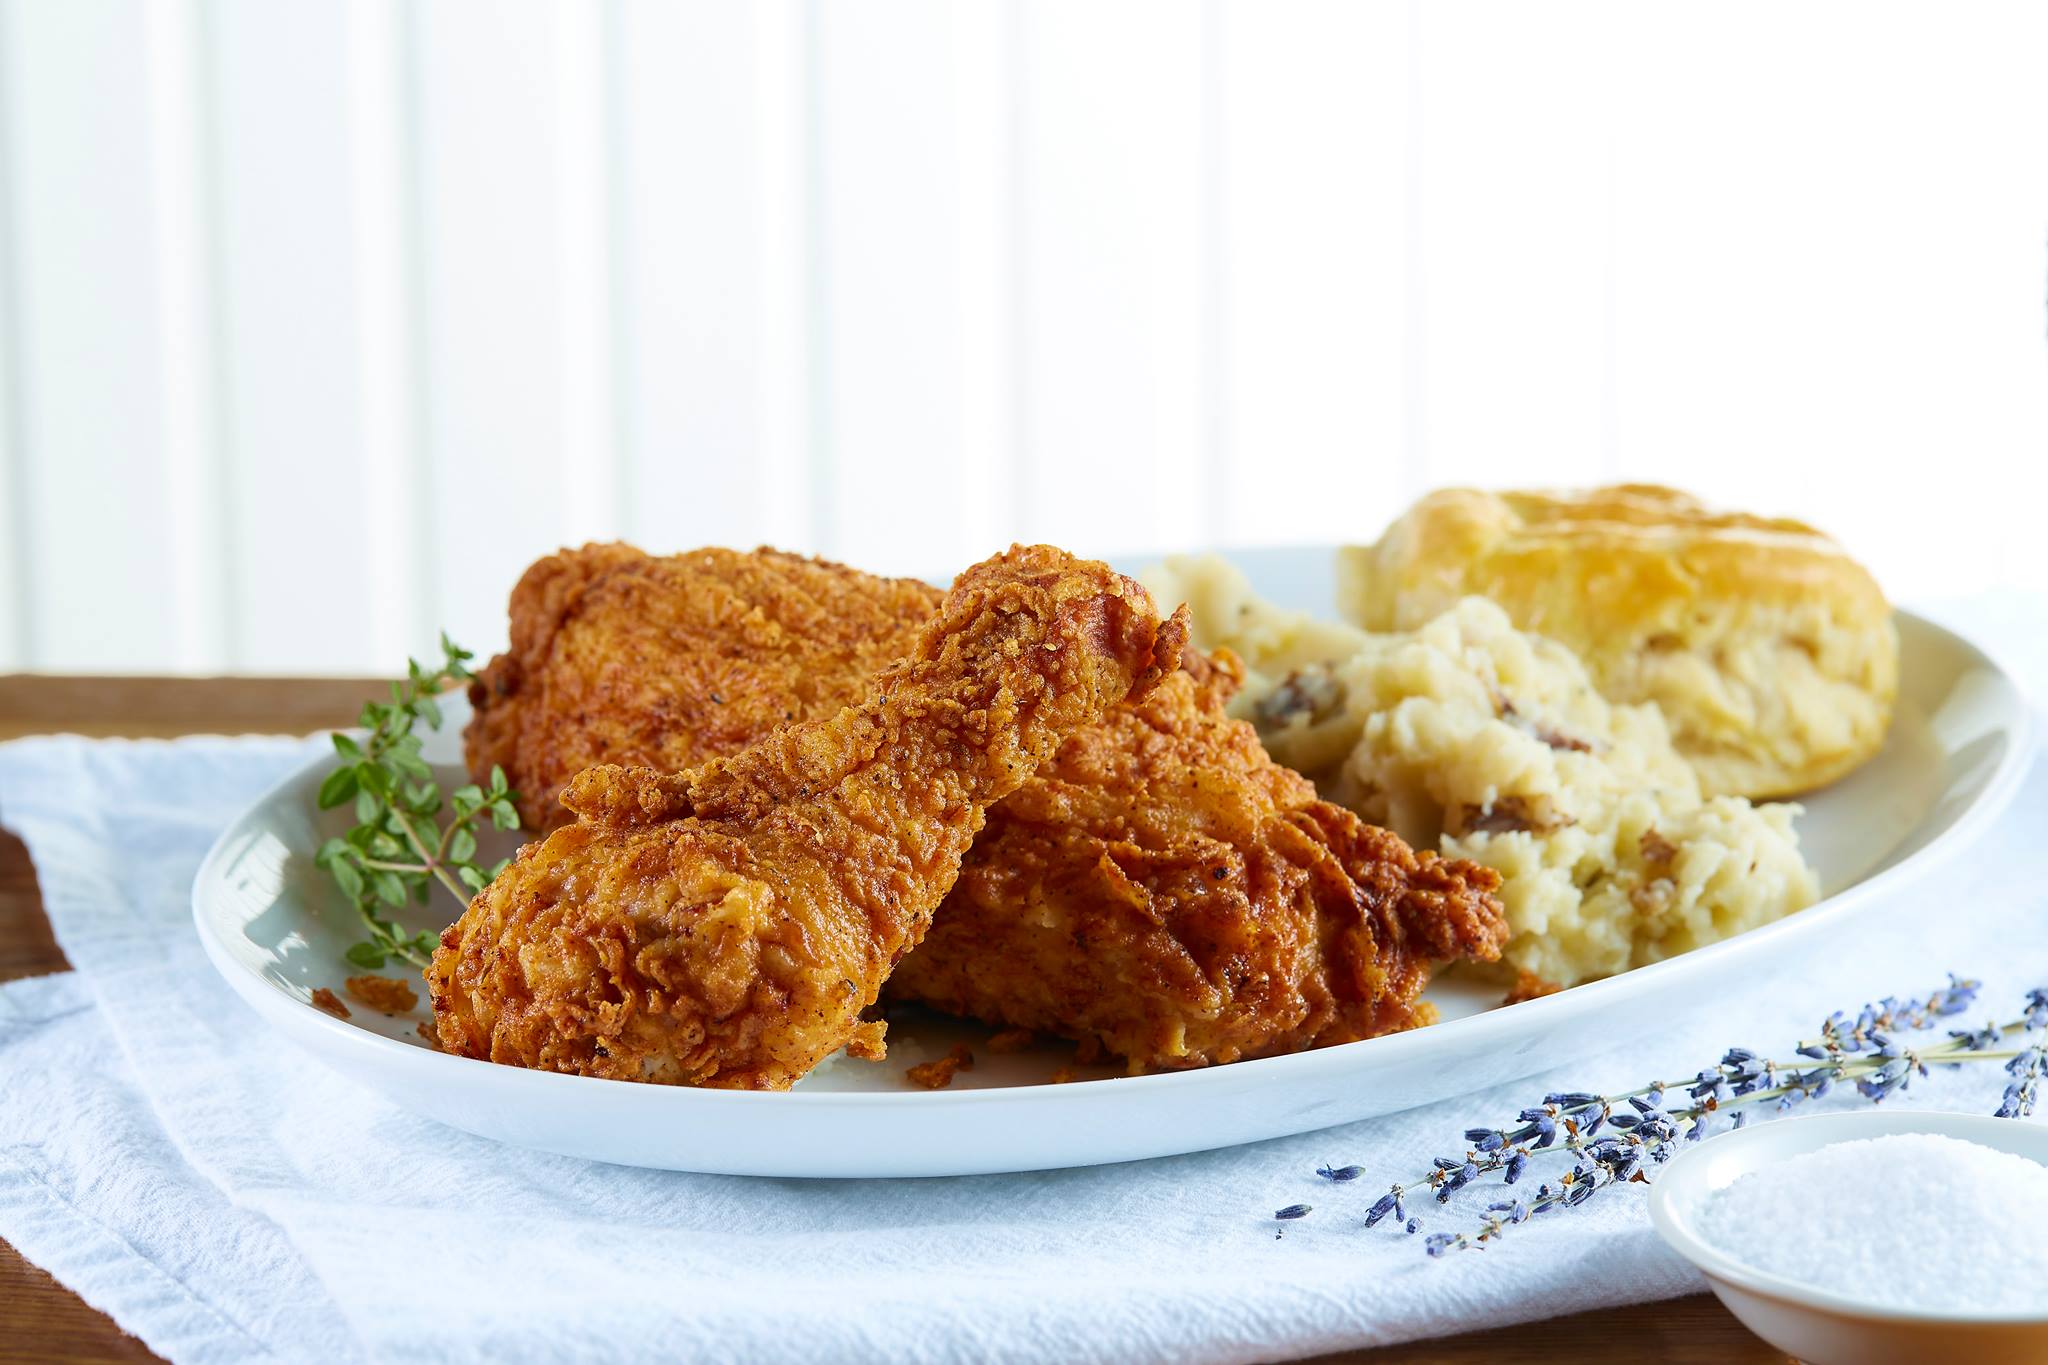 Fried chicken with a French influence